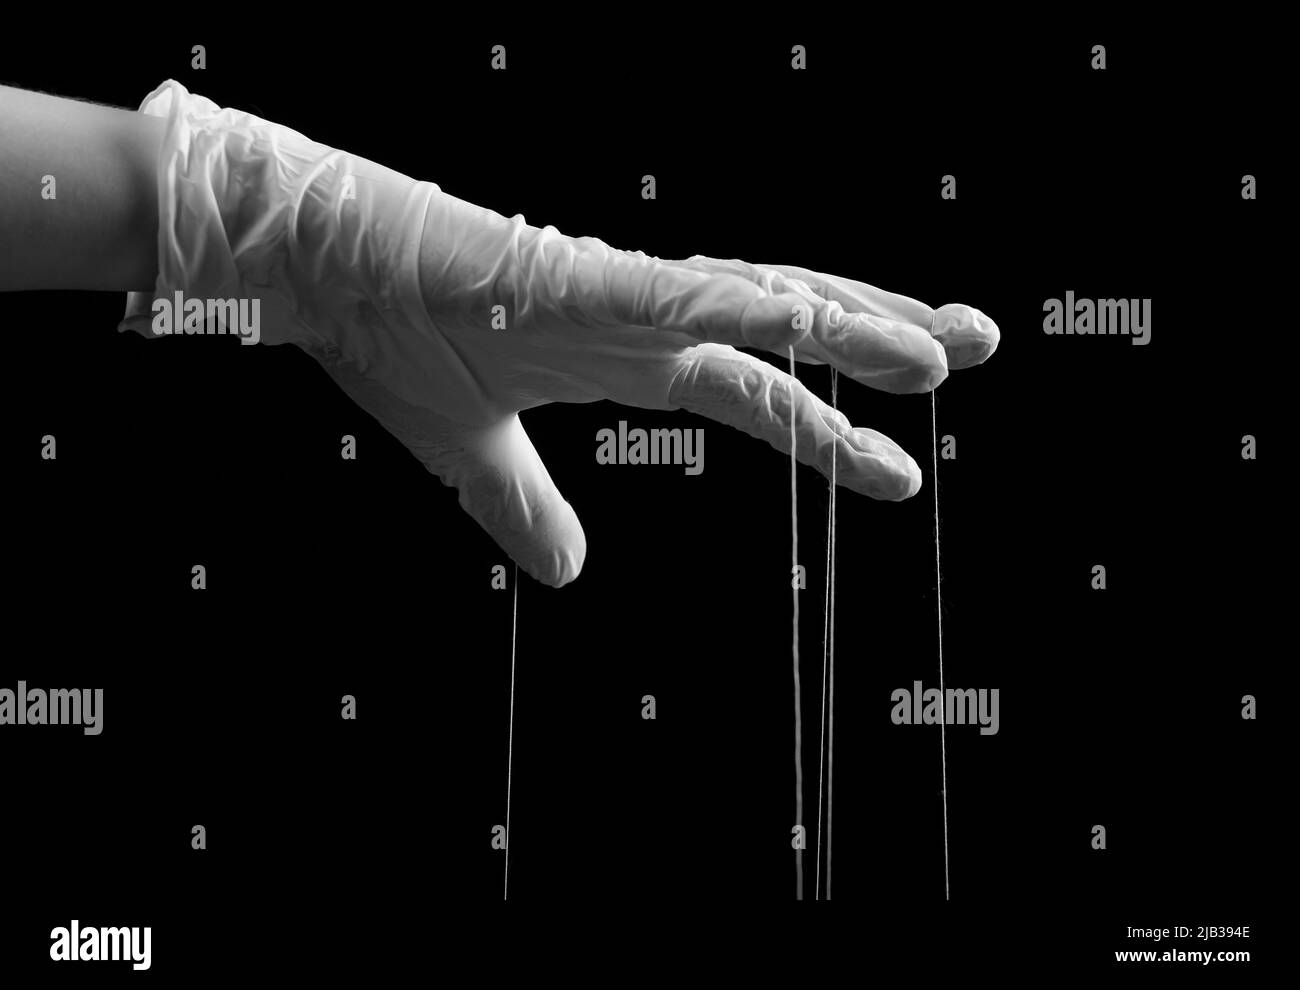 Hand in medical glove with strings on fingers. Fraud, manipulation in medicine, conspiracy theory concept. Black and white. High quality photo Stock Photo